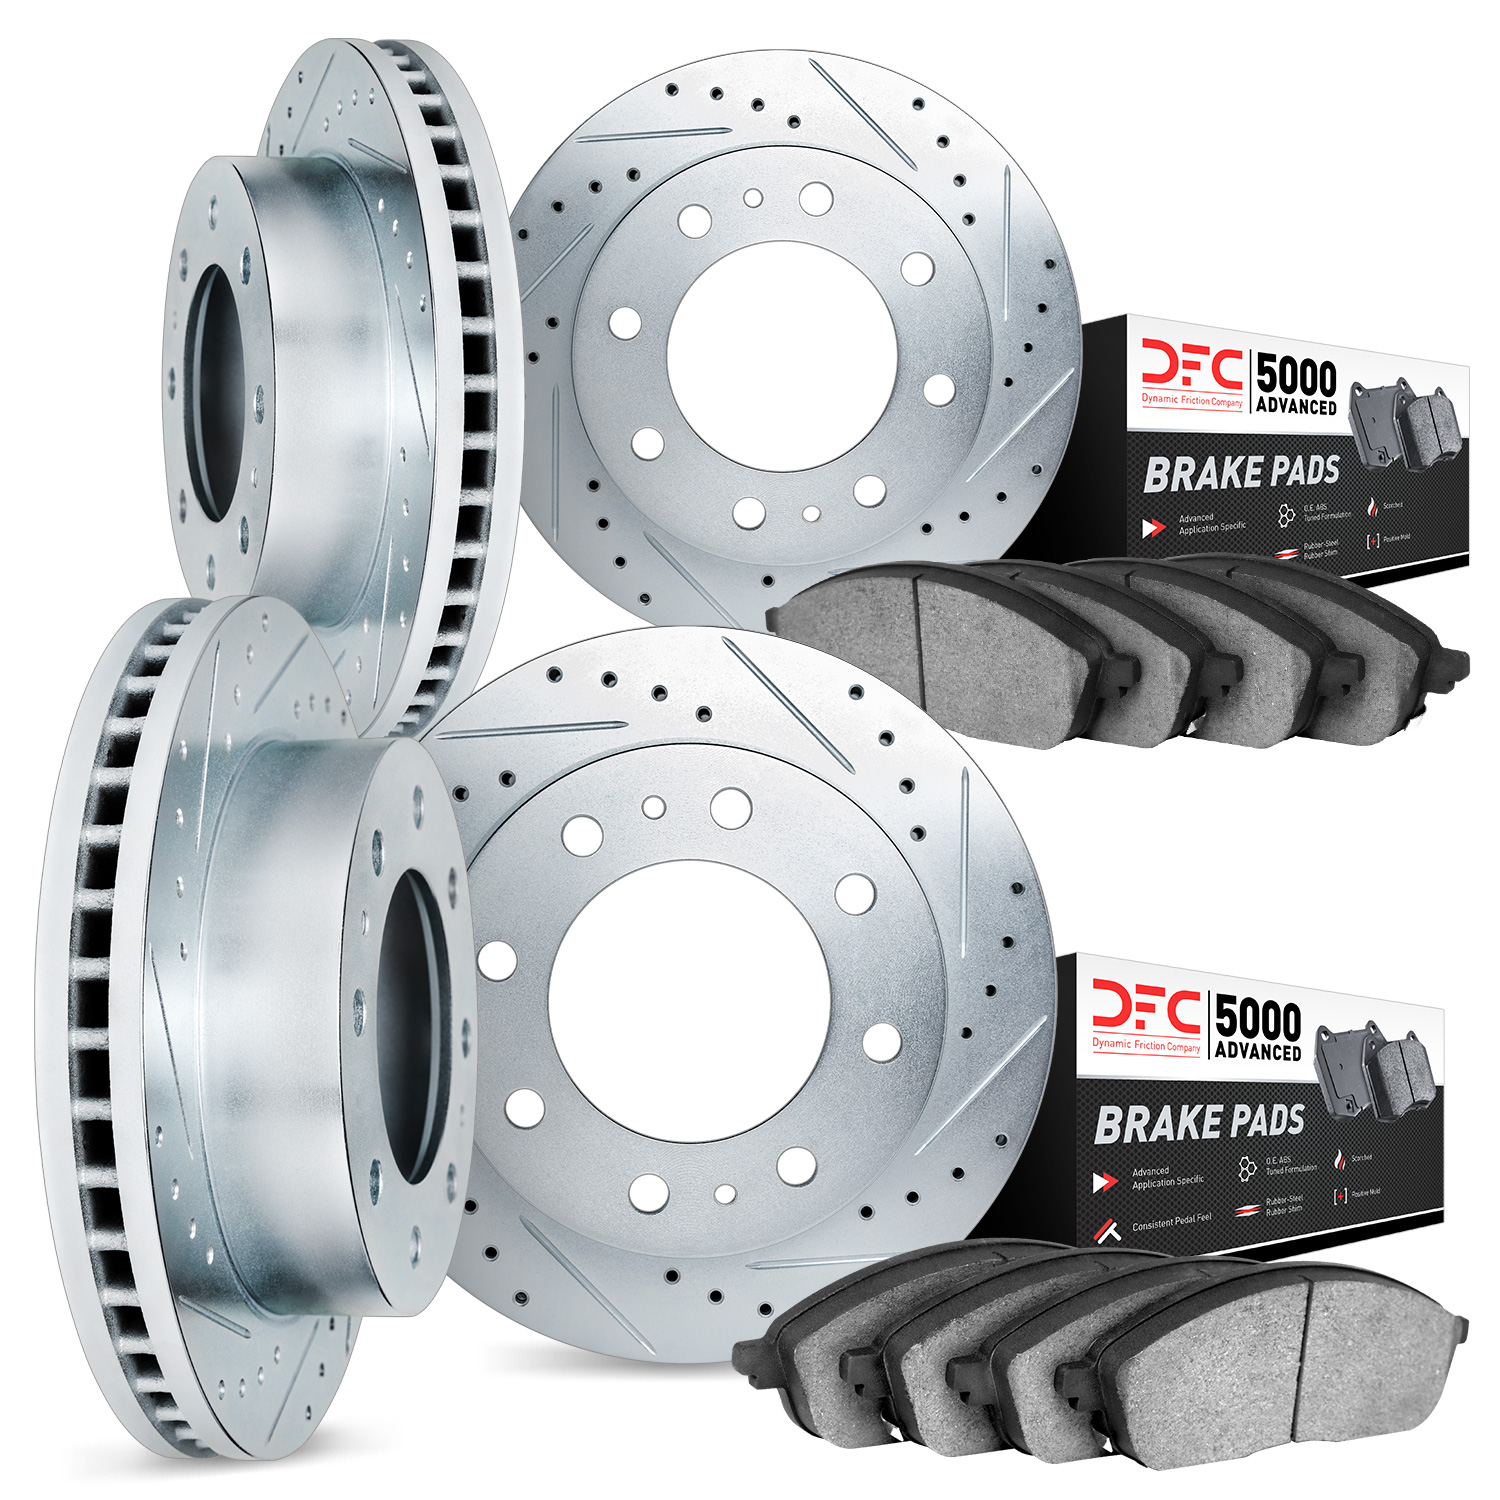 7504-54364 Drilled/Slotted Brake Rotors w/5000 Advanced Brake Pads Kit [Silver], 2006-2010 Ford/Lincoln/Mercury/Mazda, Position: